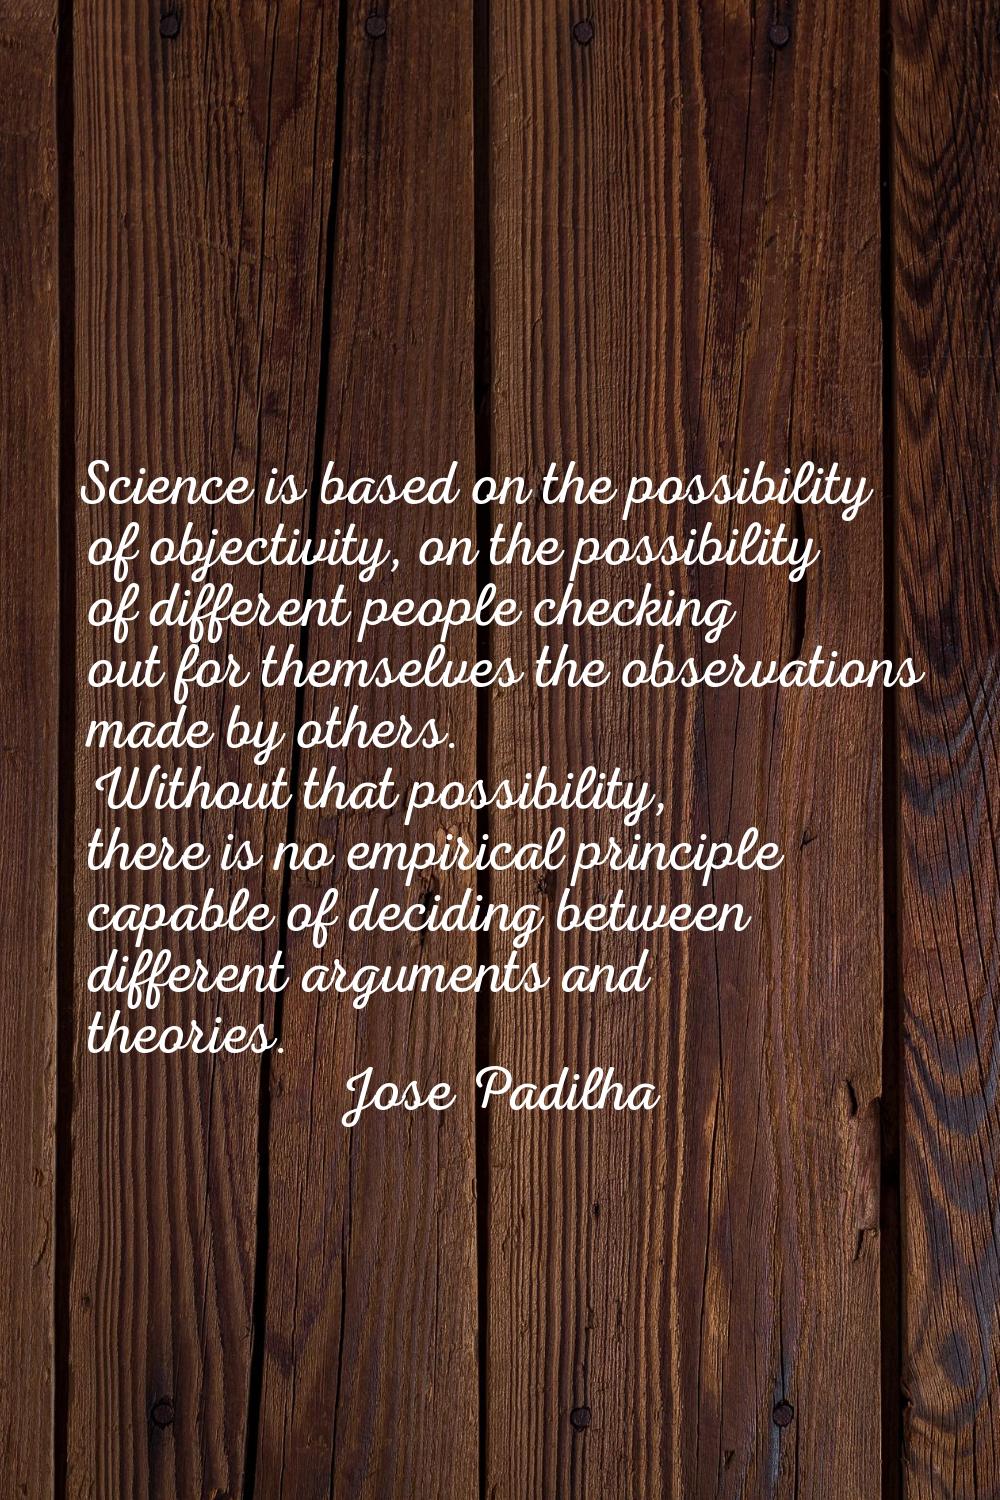 Science is based on the possibility of objectivity, on the possibility of different people checking